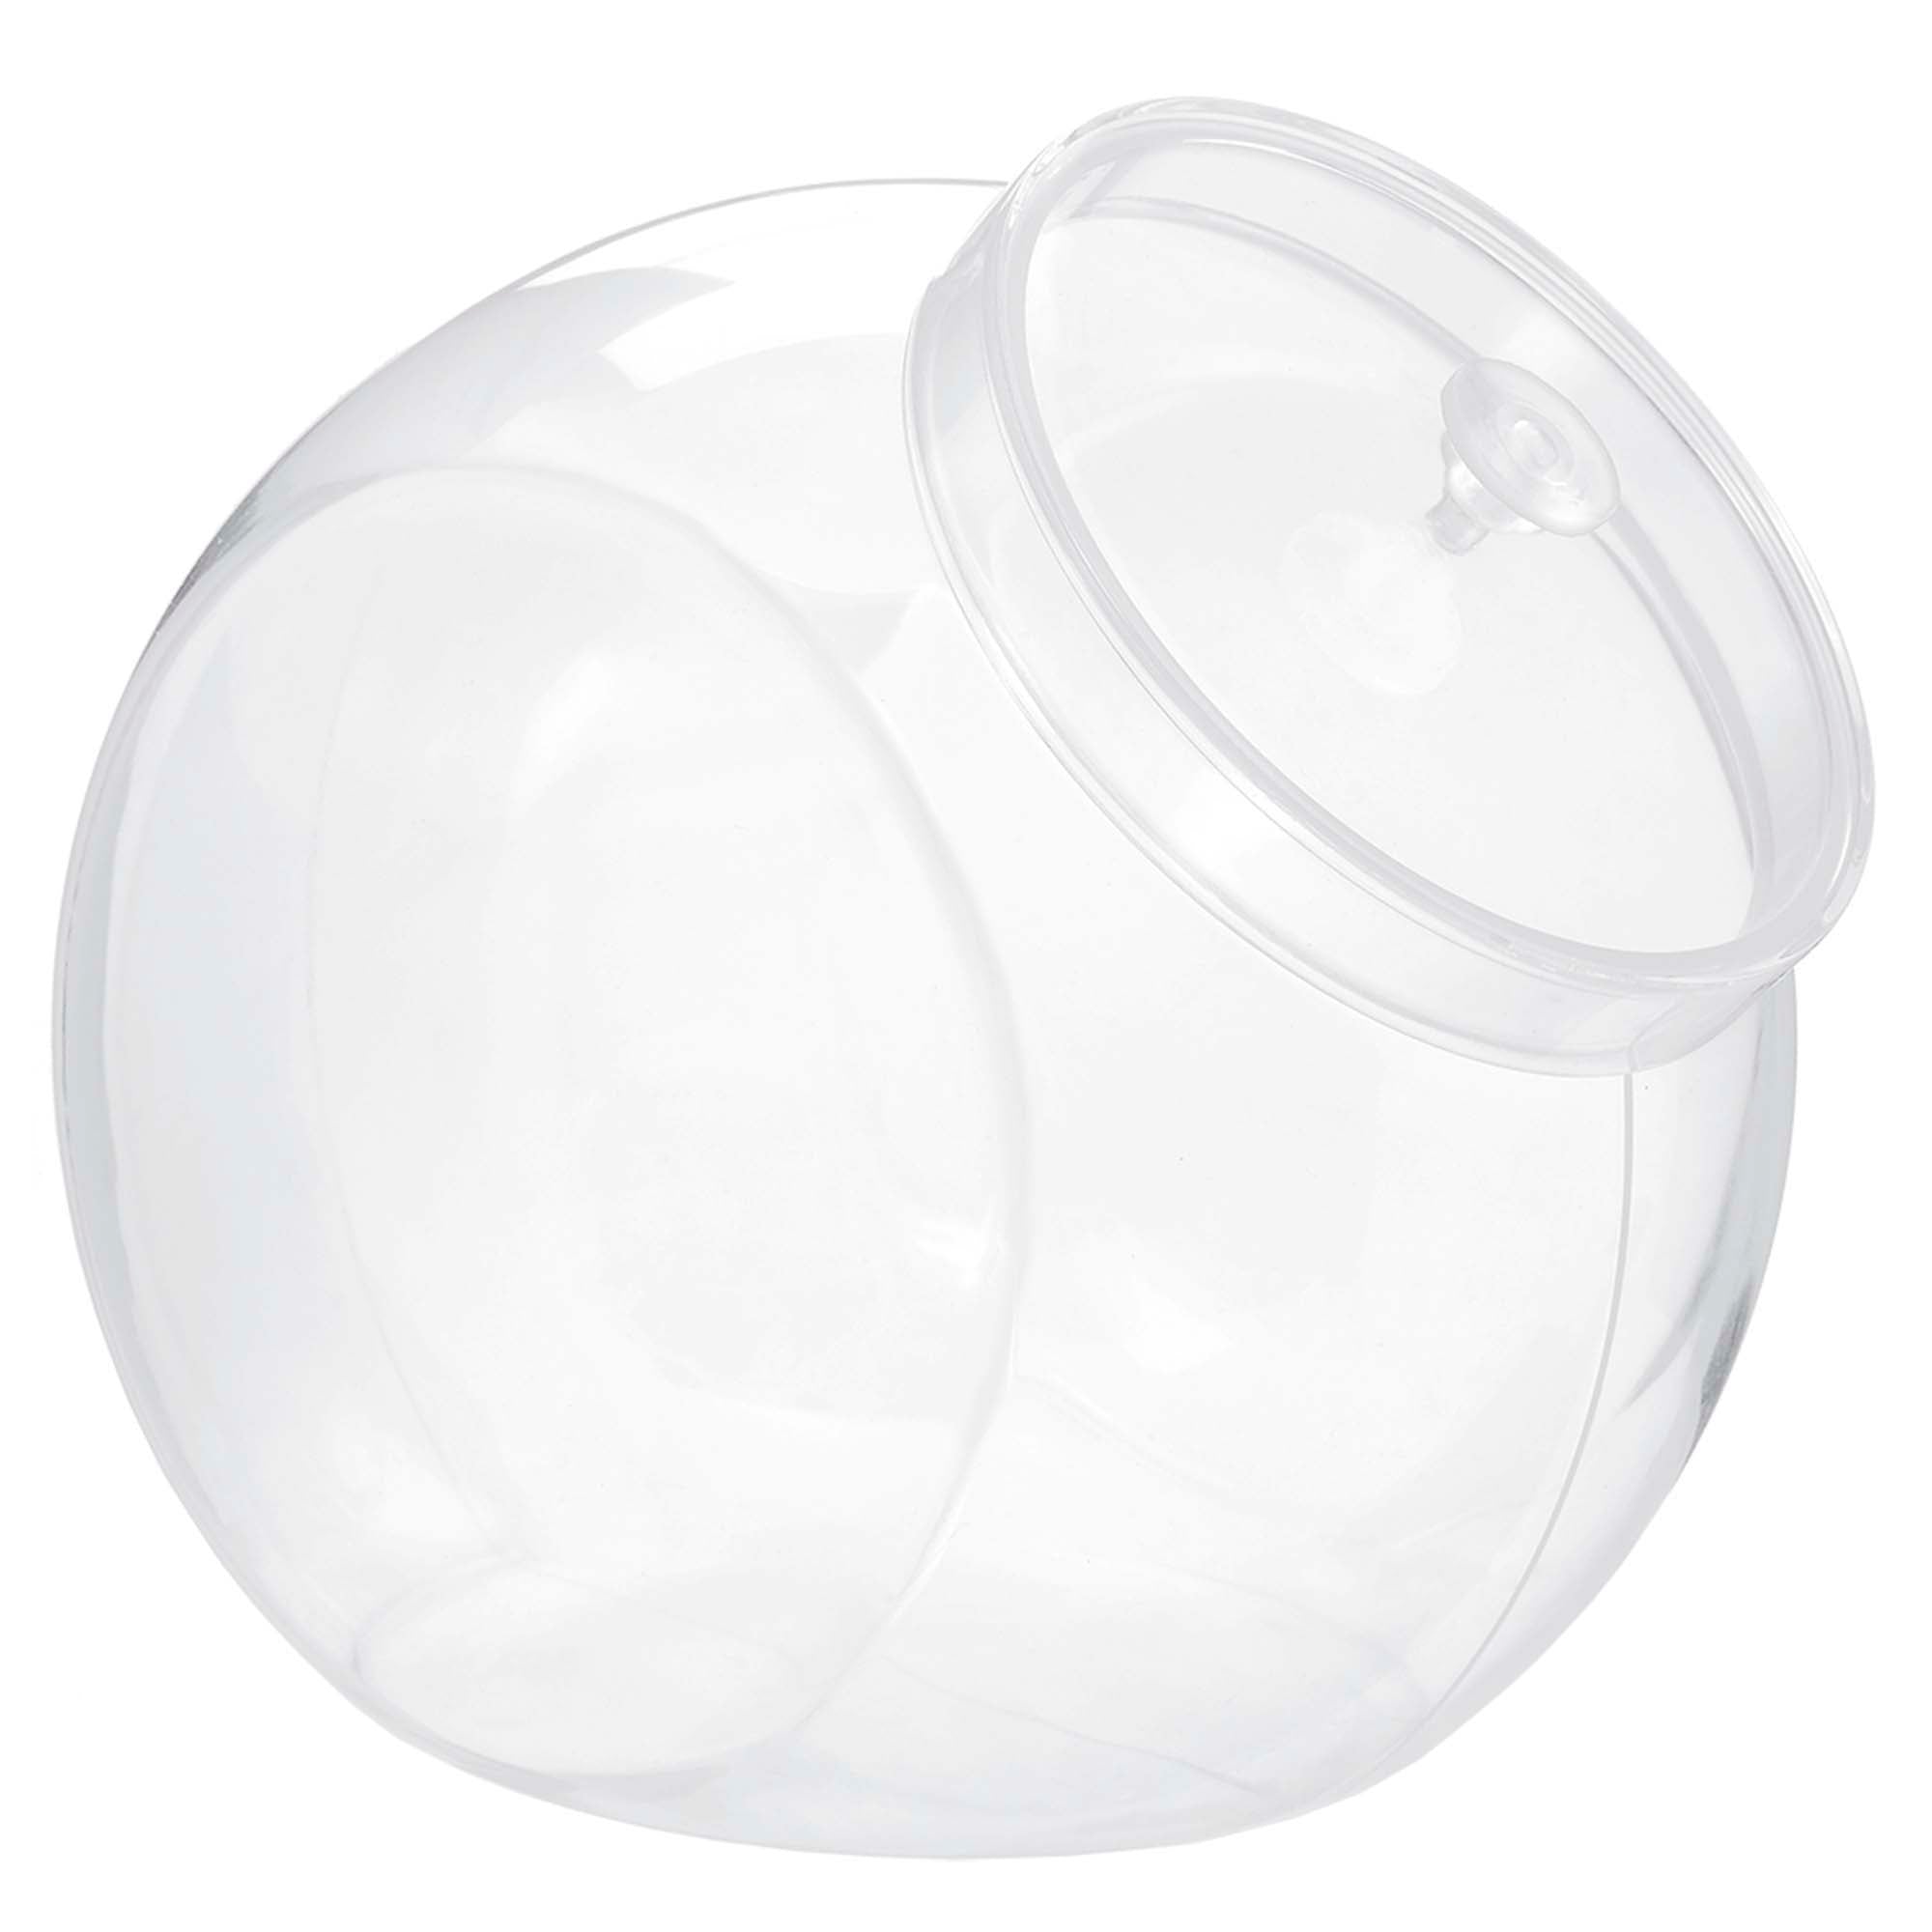 Container with Lid  Plastic Clear  7.5in  80oz